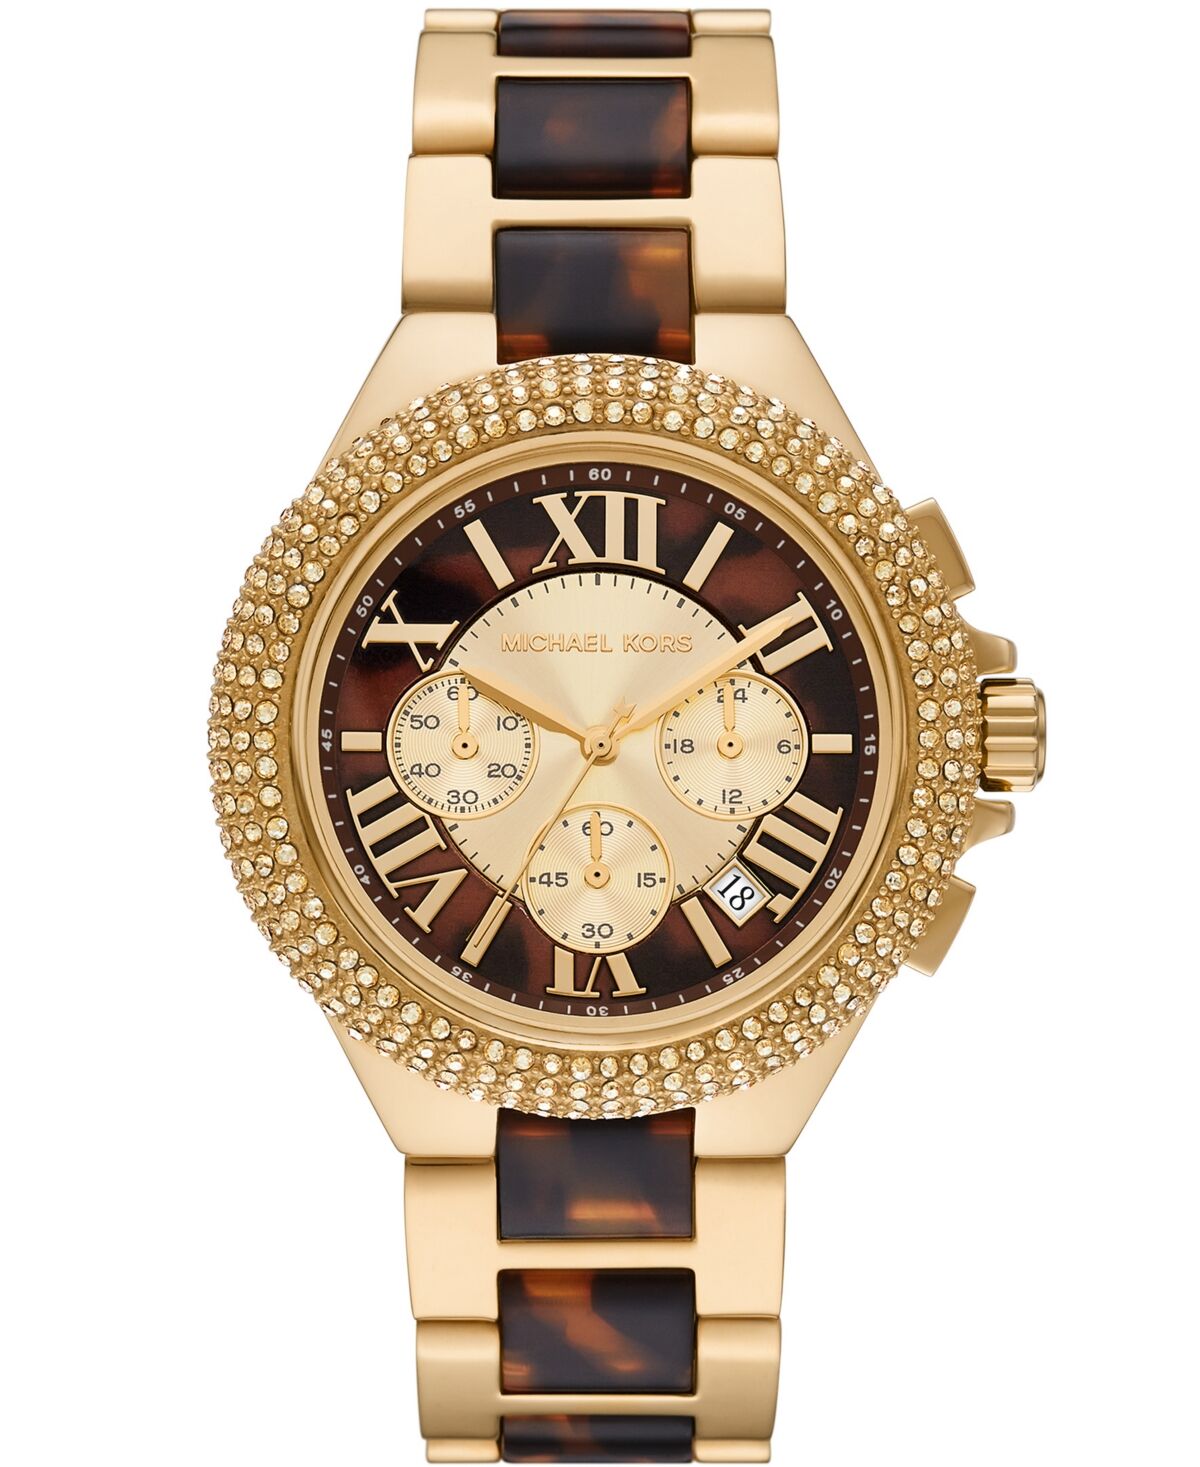 Michael Kors Women's Camille Chronograph Gold-Tone Stainless Steel and Tortoise Acetate Bracelet Watch 43mm - Two-Tone